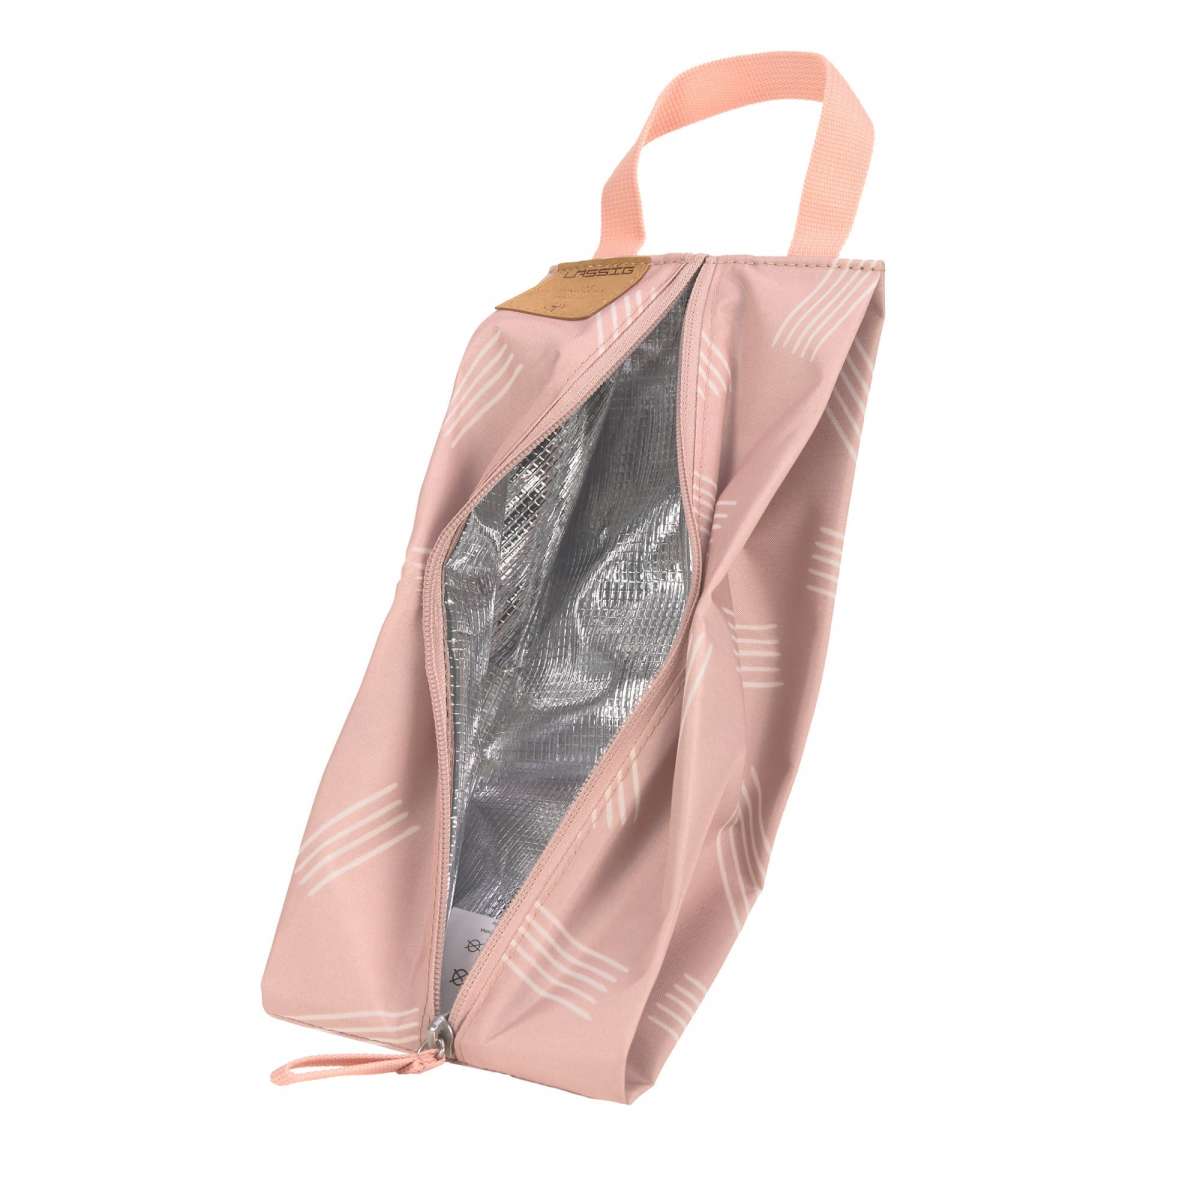 Sac repas isotherme Béaba Rose